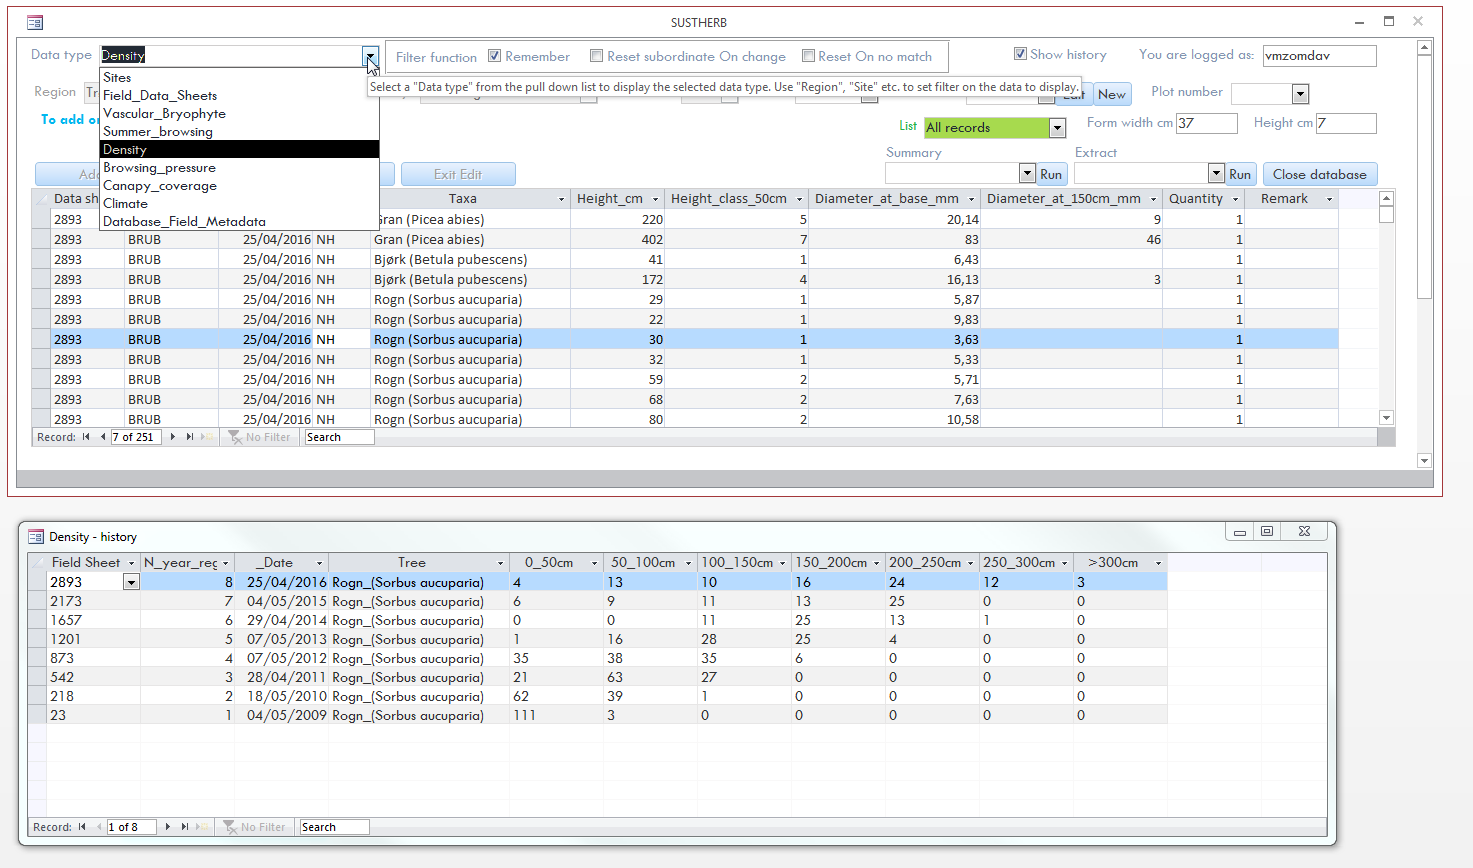 Screenshot from the application interface of the new database.